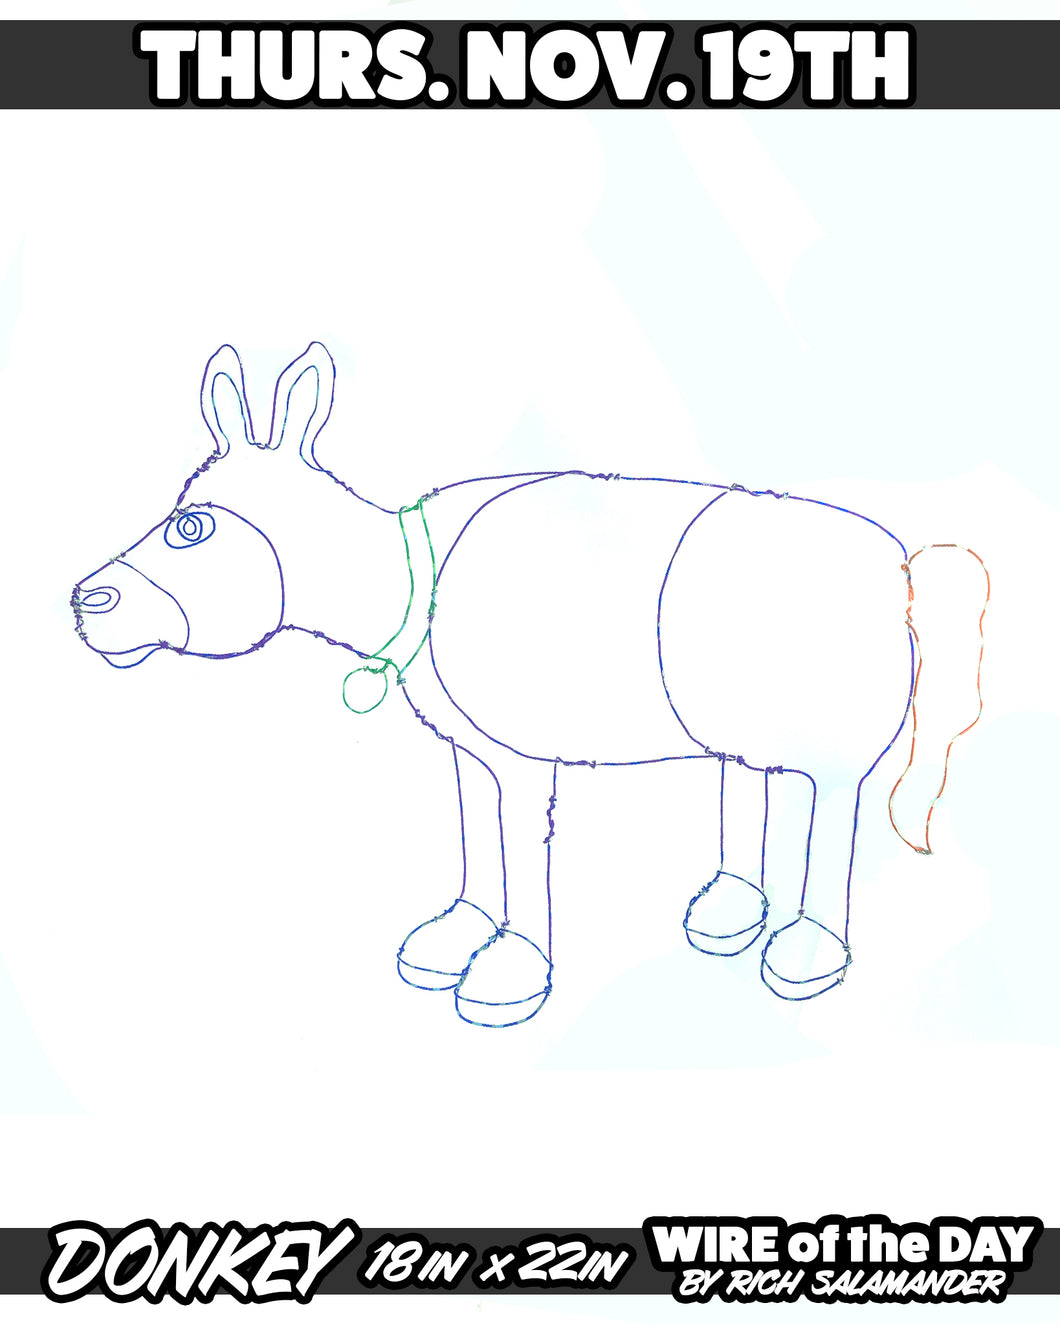 WIRE of the DAY DONKEY